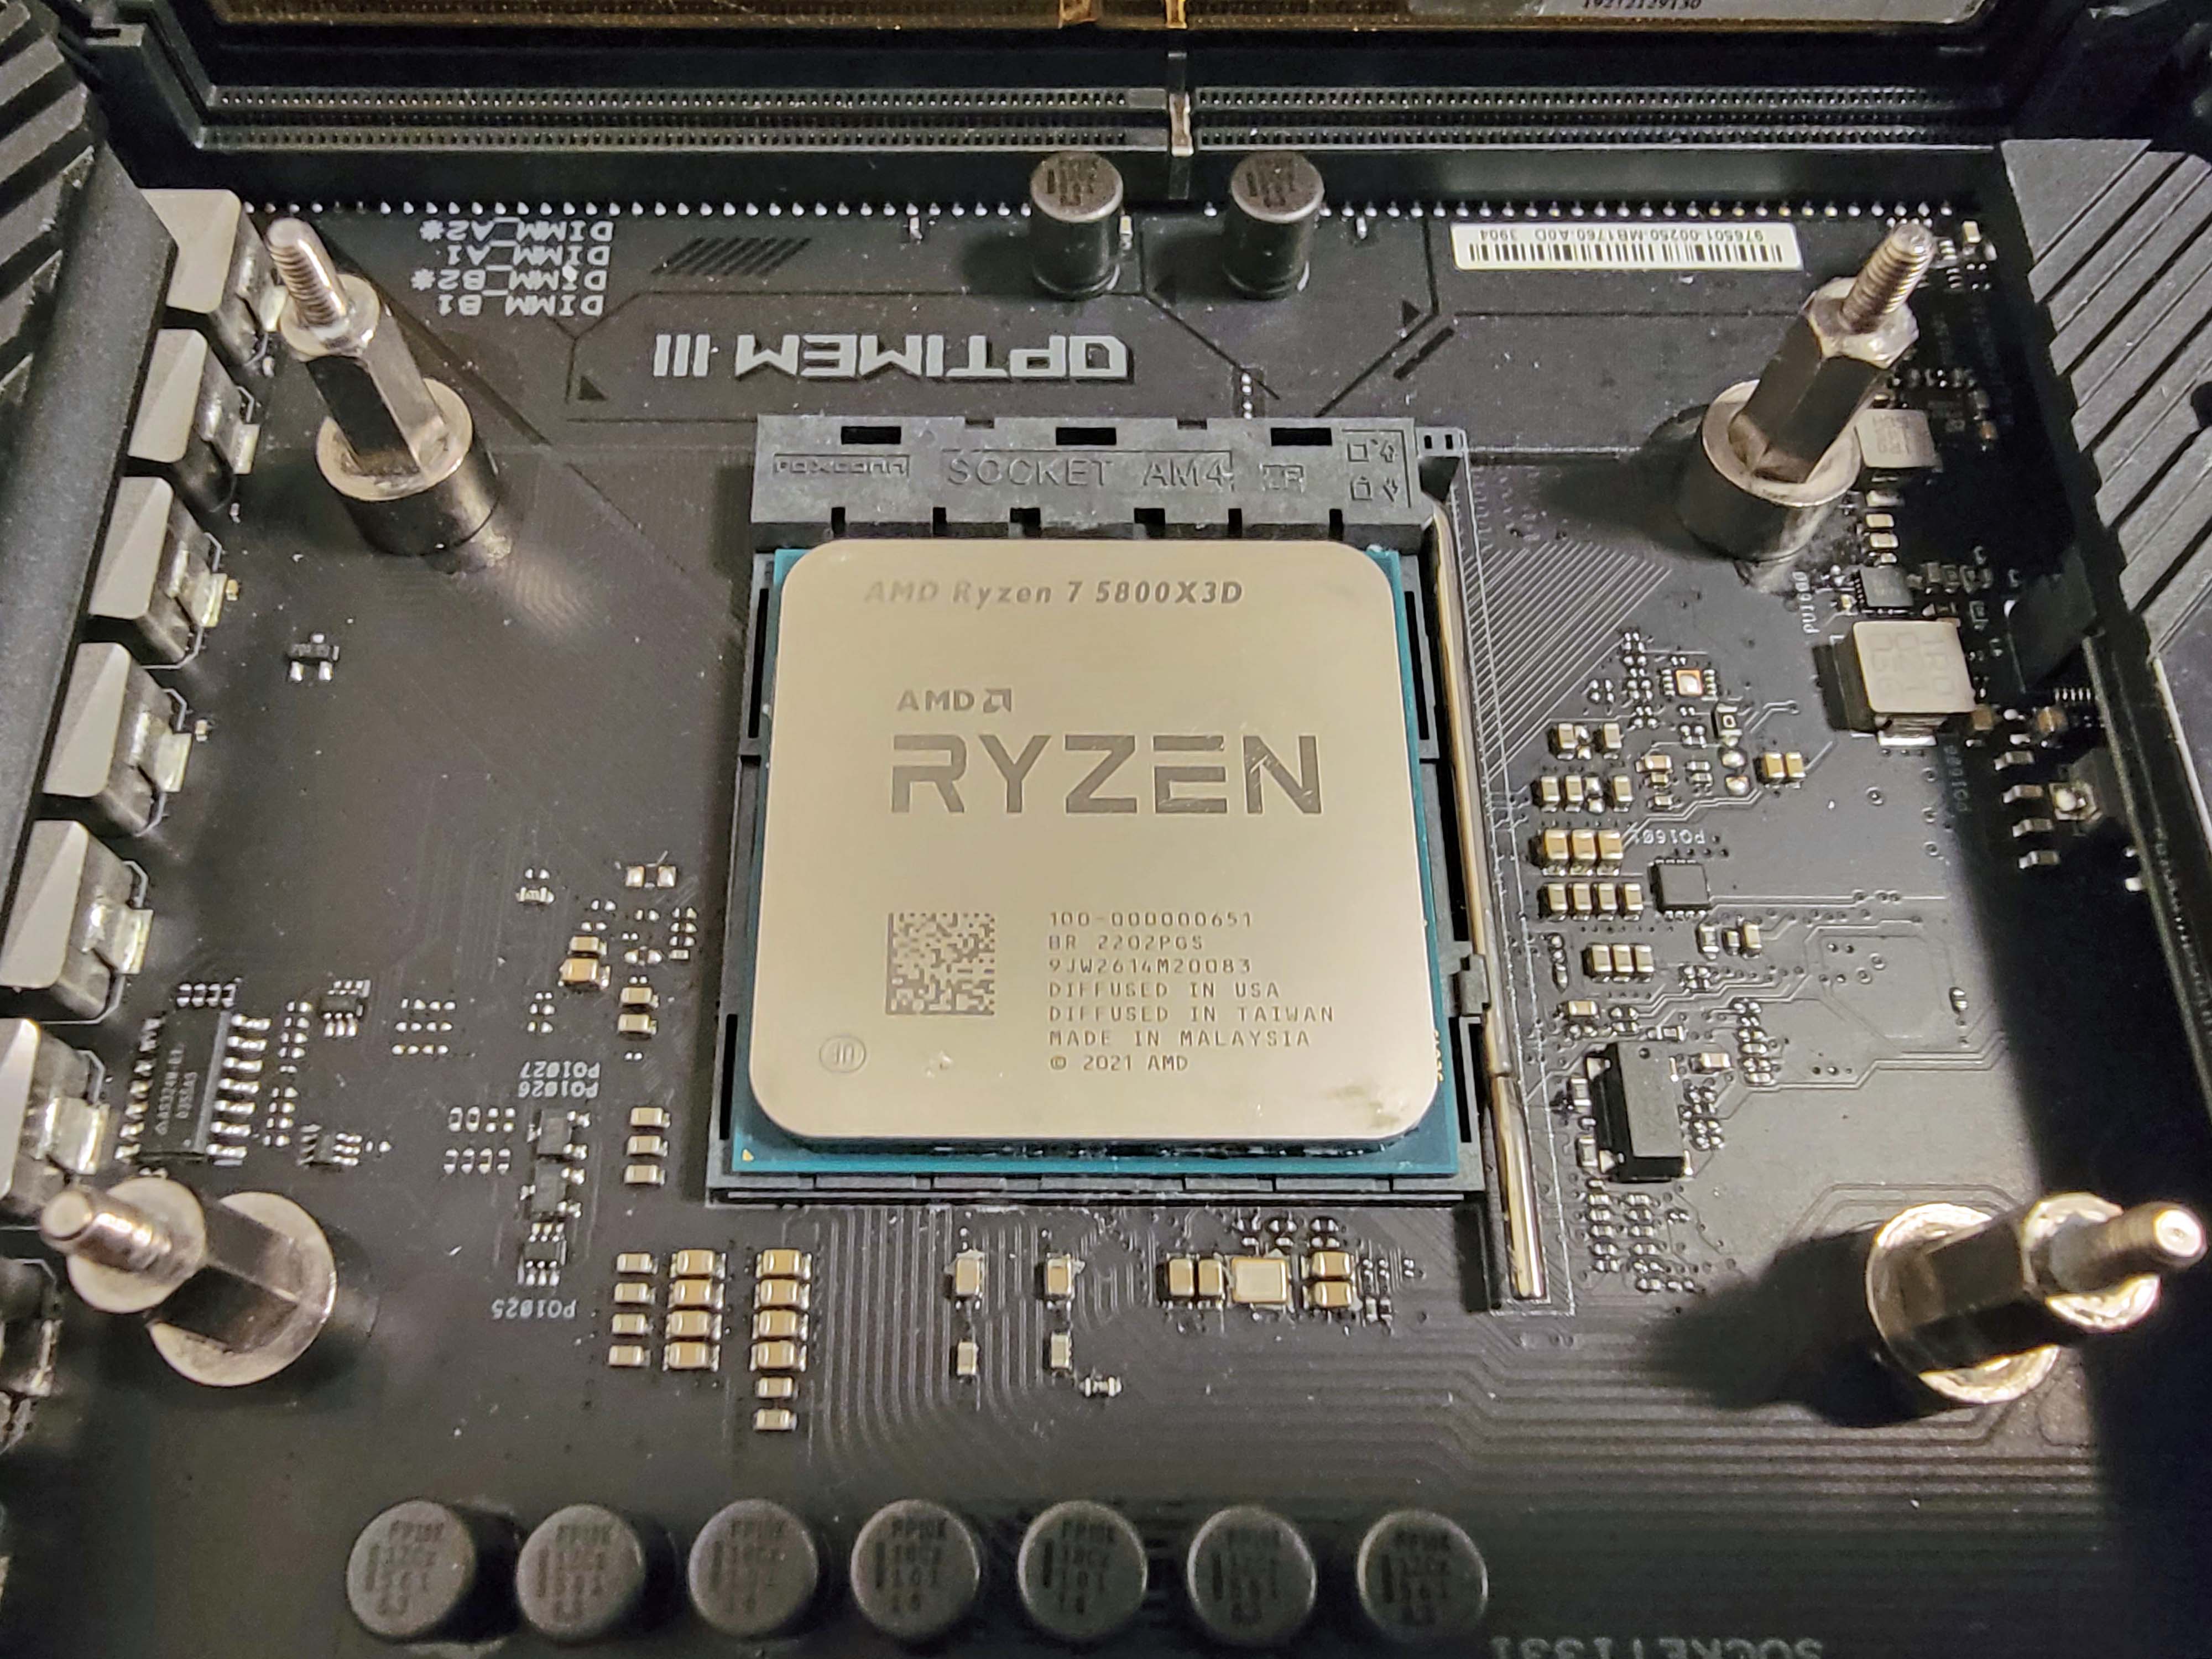 AMD Ryzen 7 5800X3D Review: 3D V-Cache Powers a New Gaming 